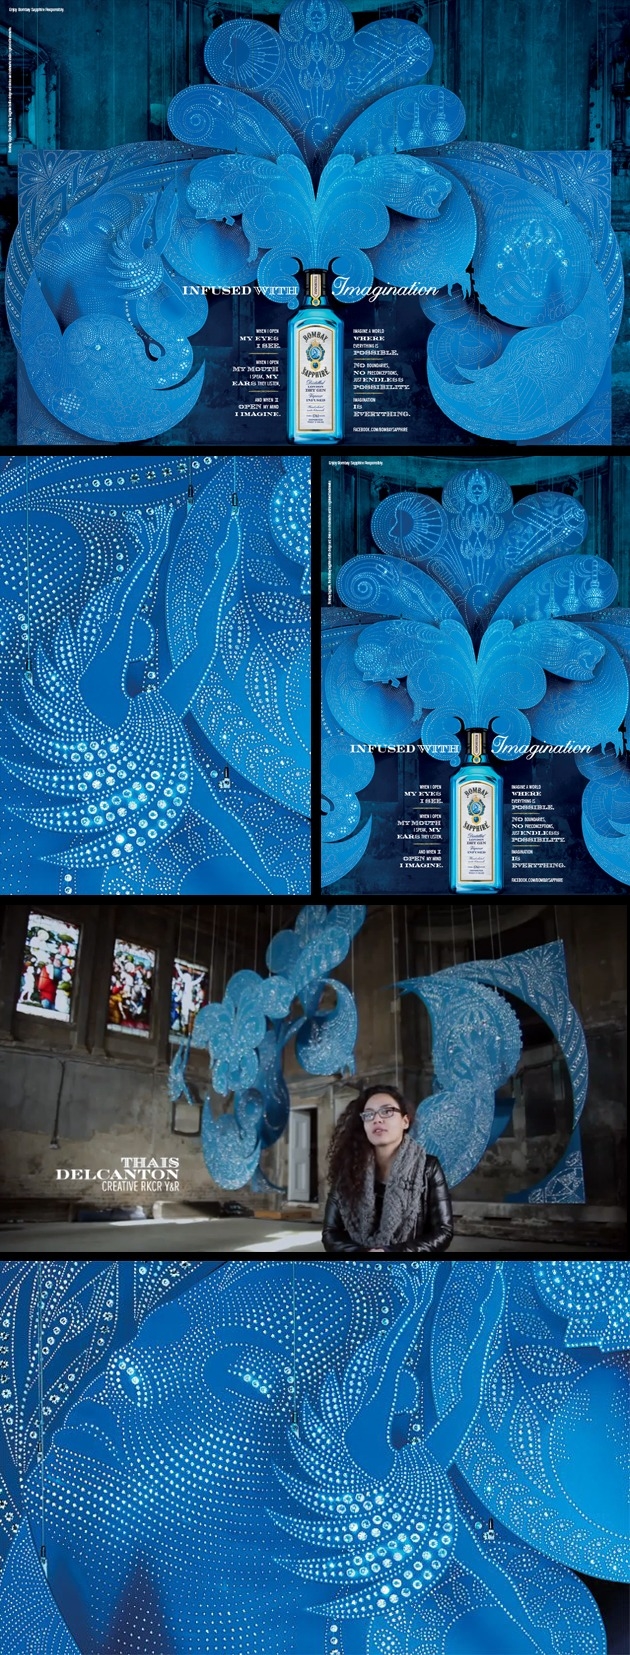 Yehrin Tong / Bombay Sapphire "Infused With Imagination" Set Build